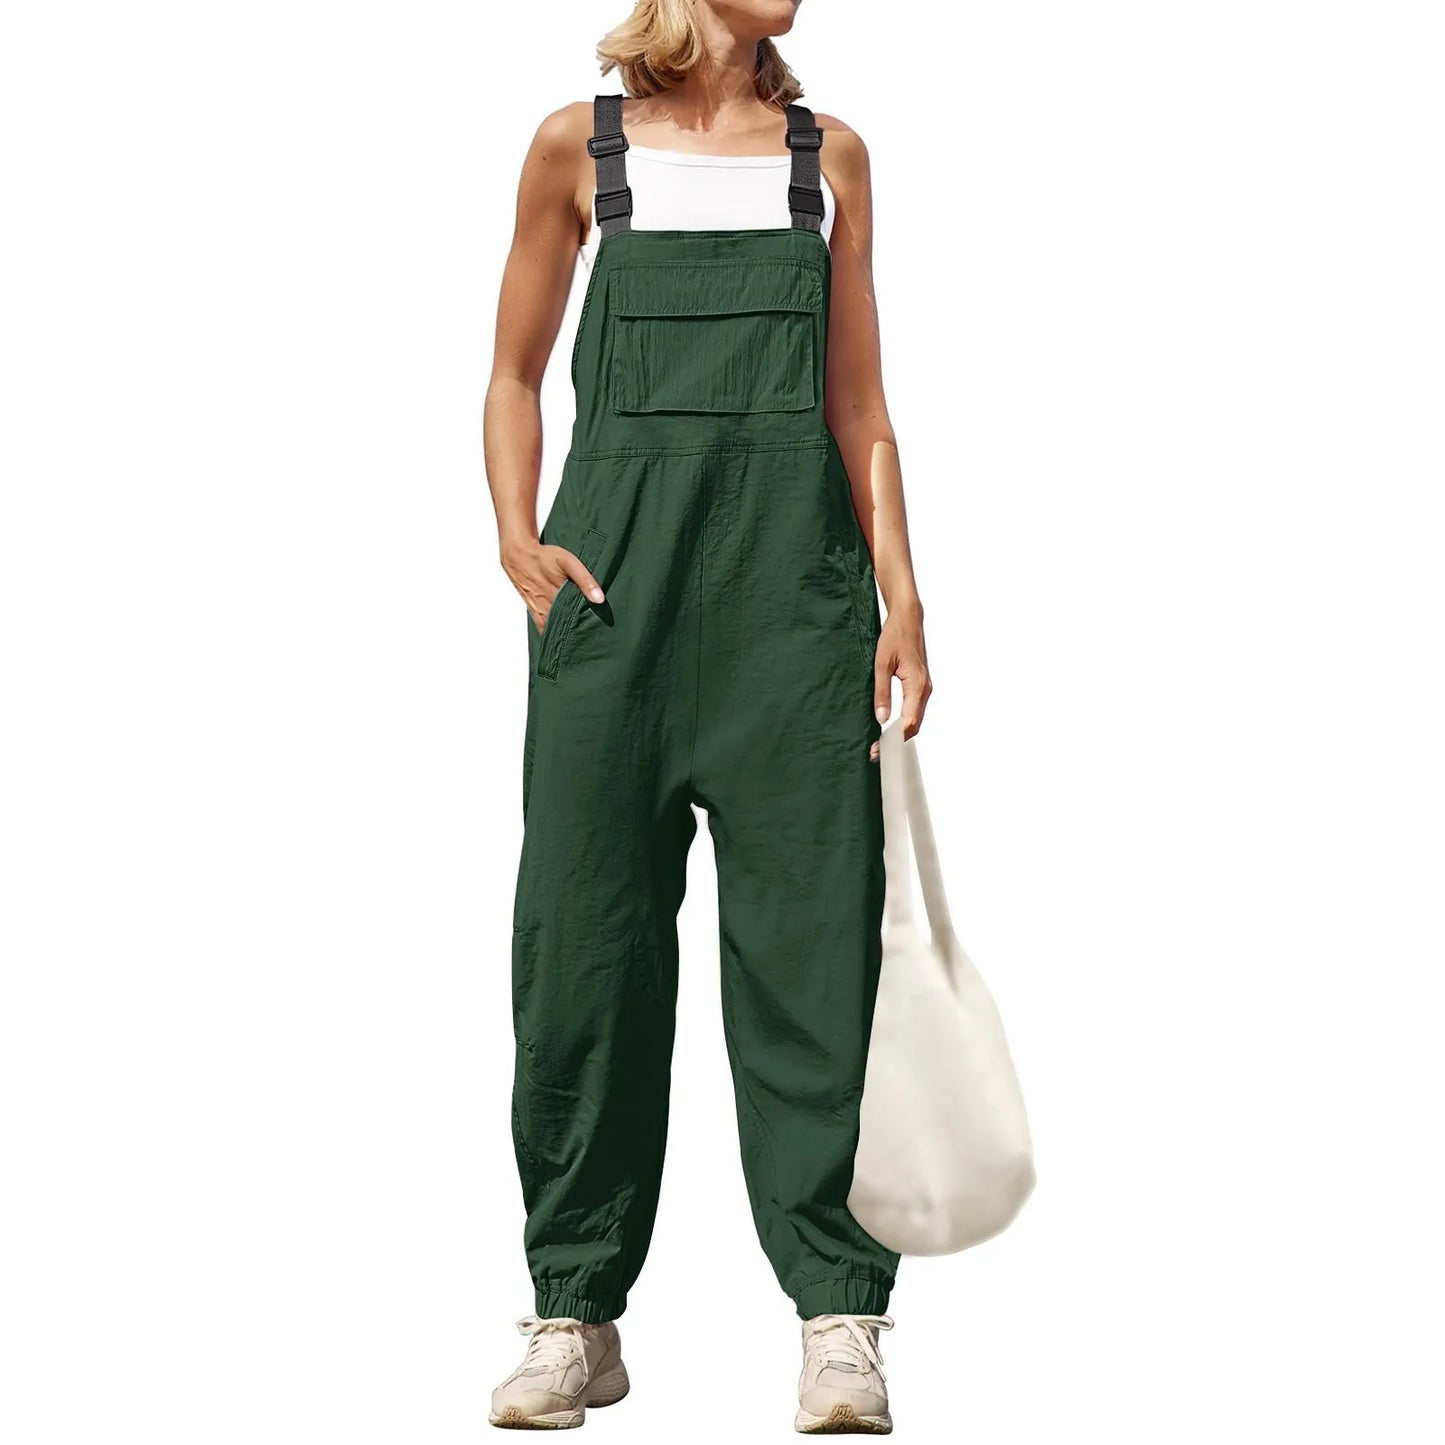 Jumpsuits- Women's Solid Bib Pencil Pantsuits with Multipockets - Baggy Overalls- Army Green- Chuzko Women Clothing